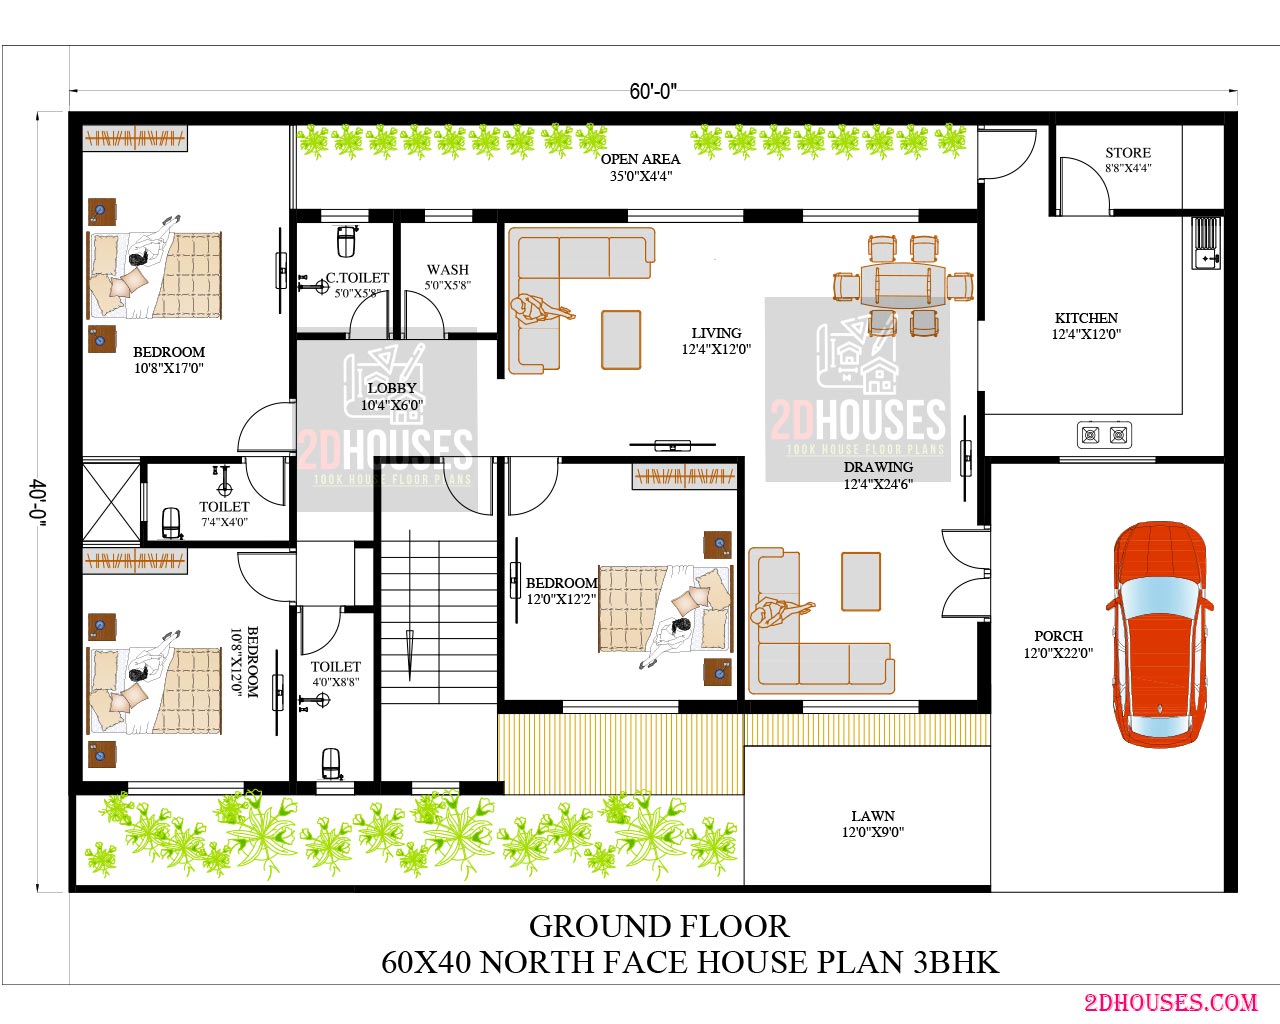 2400 sqft north face 60x40 house plans 3bhk